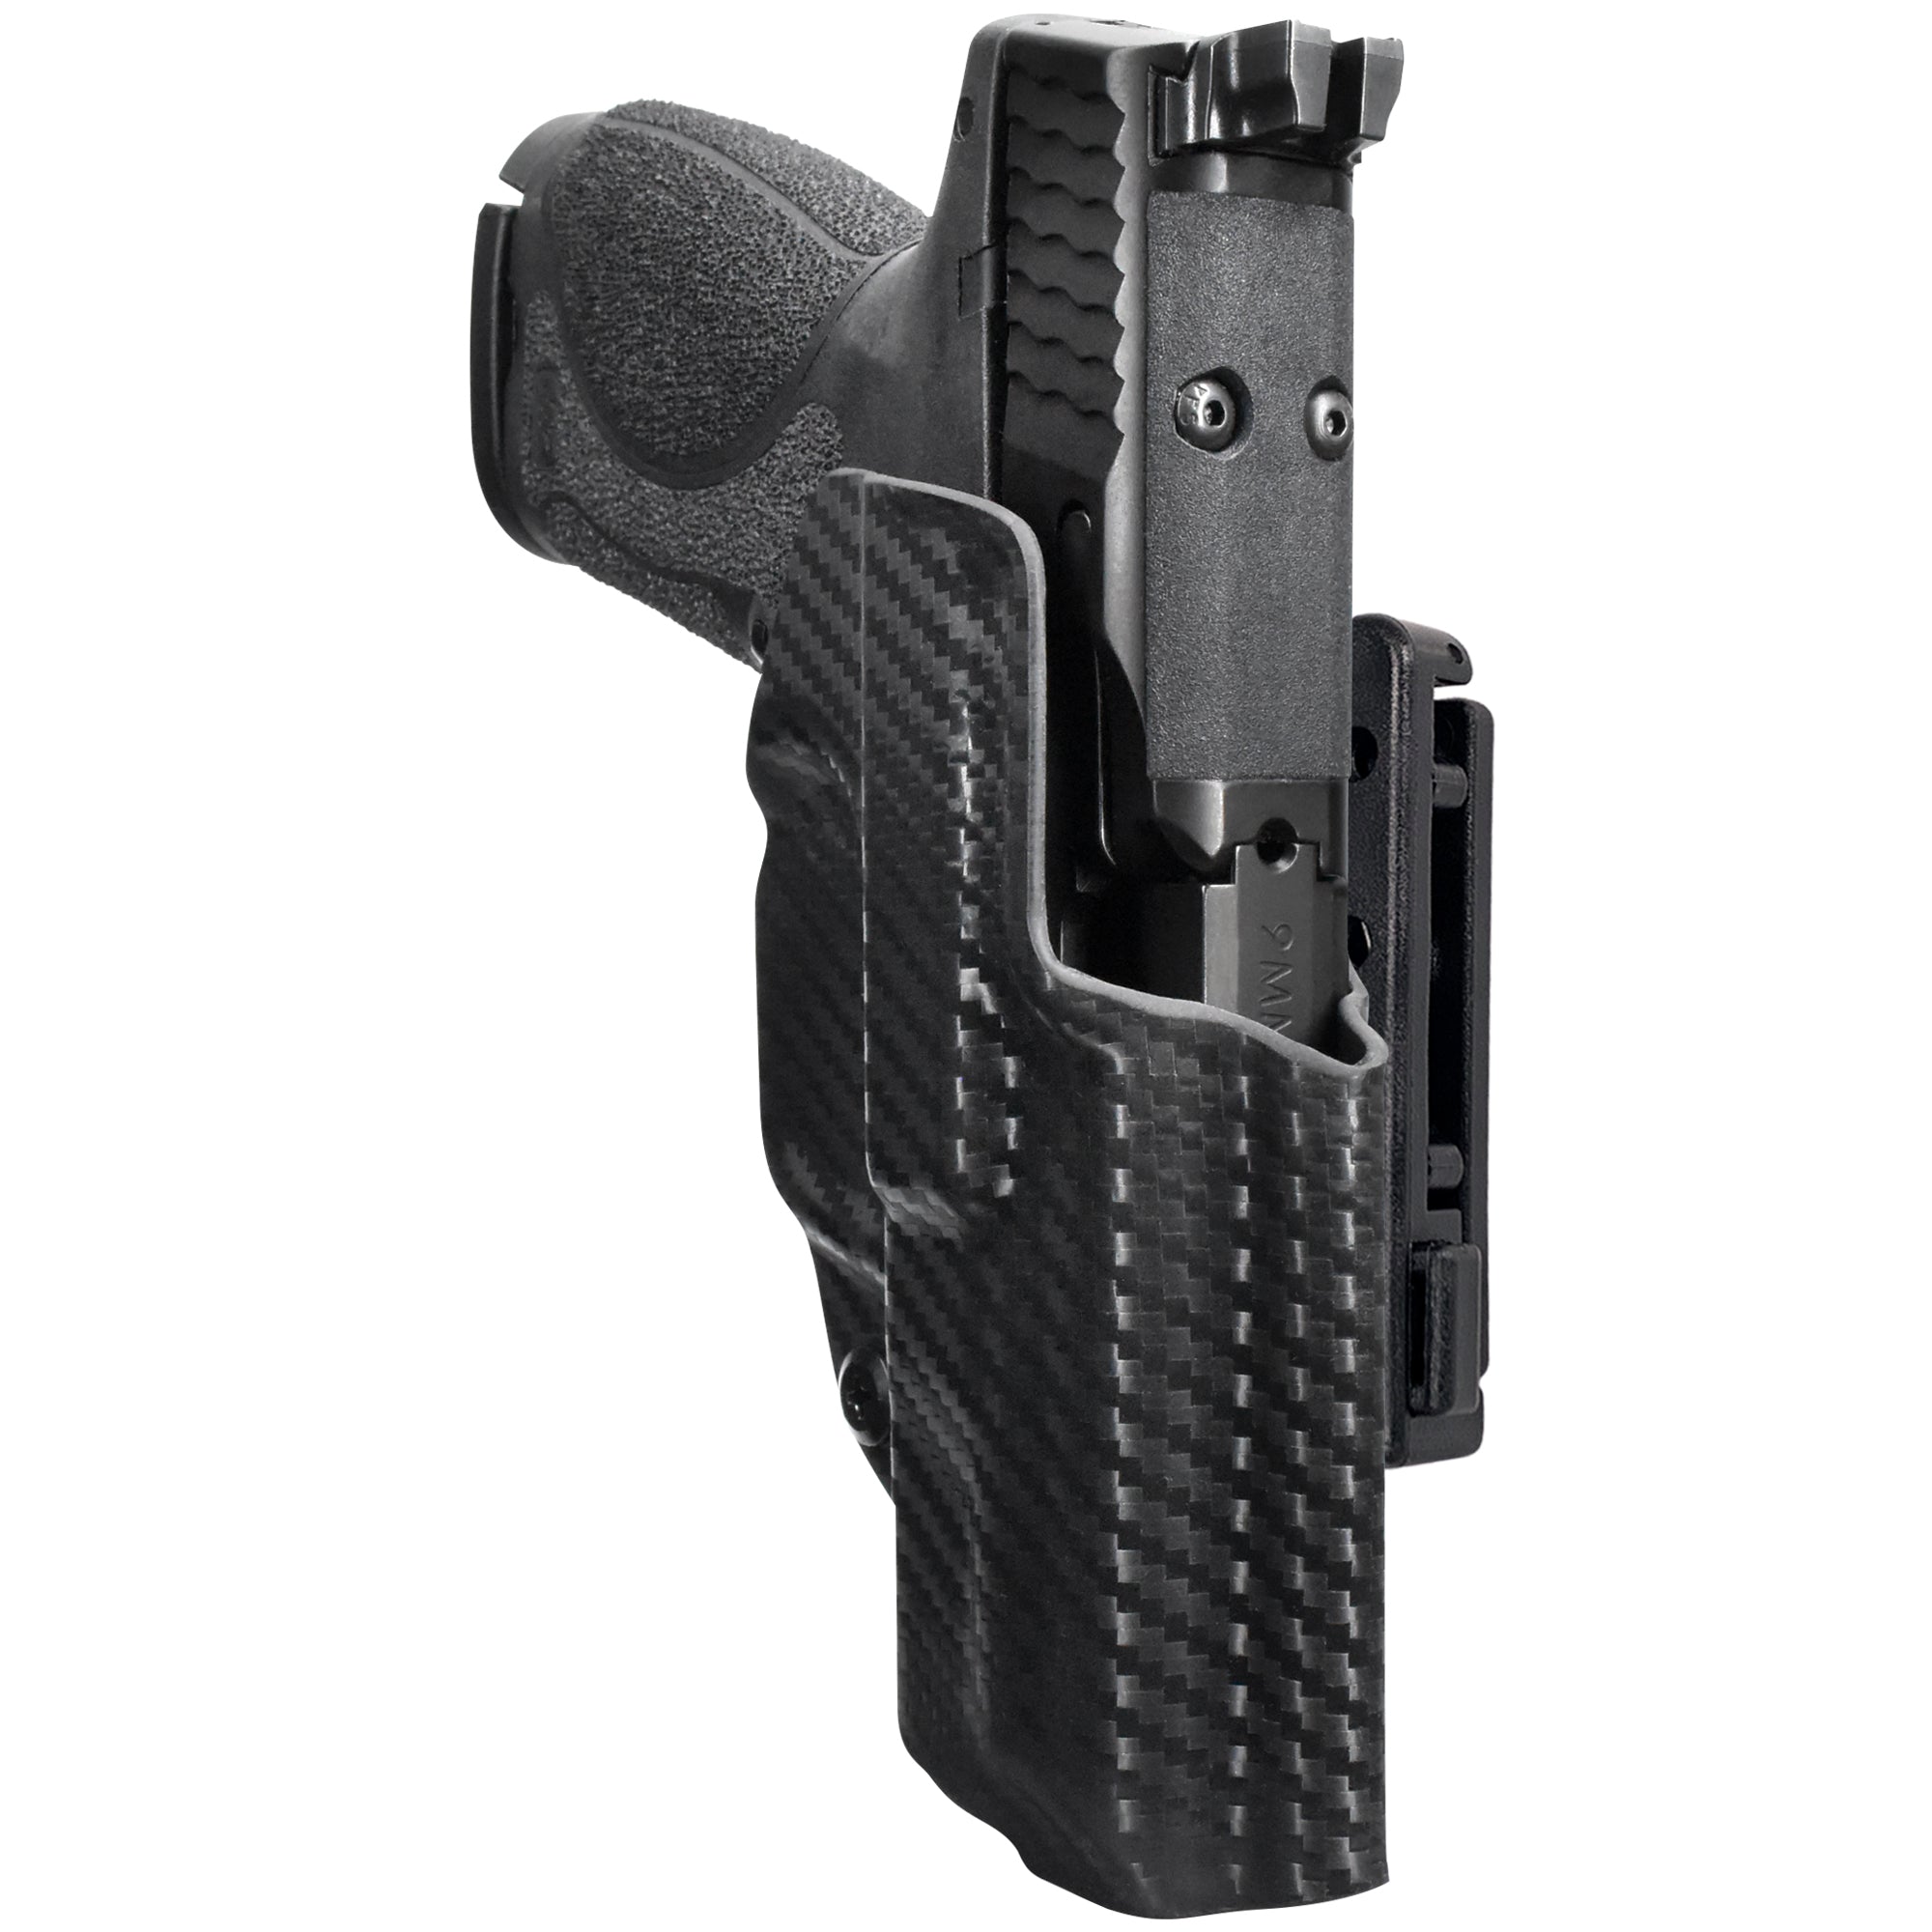 Smith & Wesson M&P9 Subcompact Pro IDPA Competition Holster in Carbon Fiber